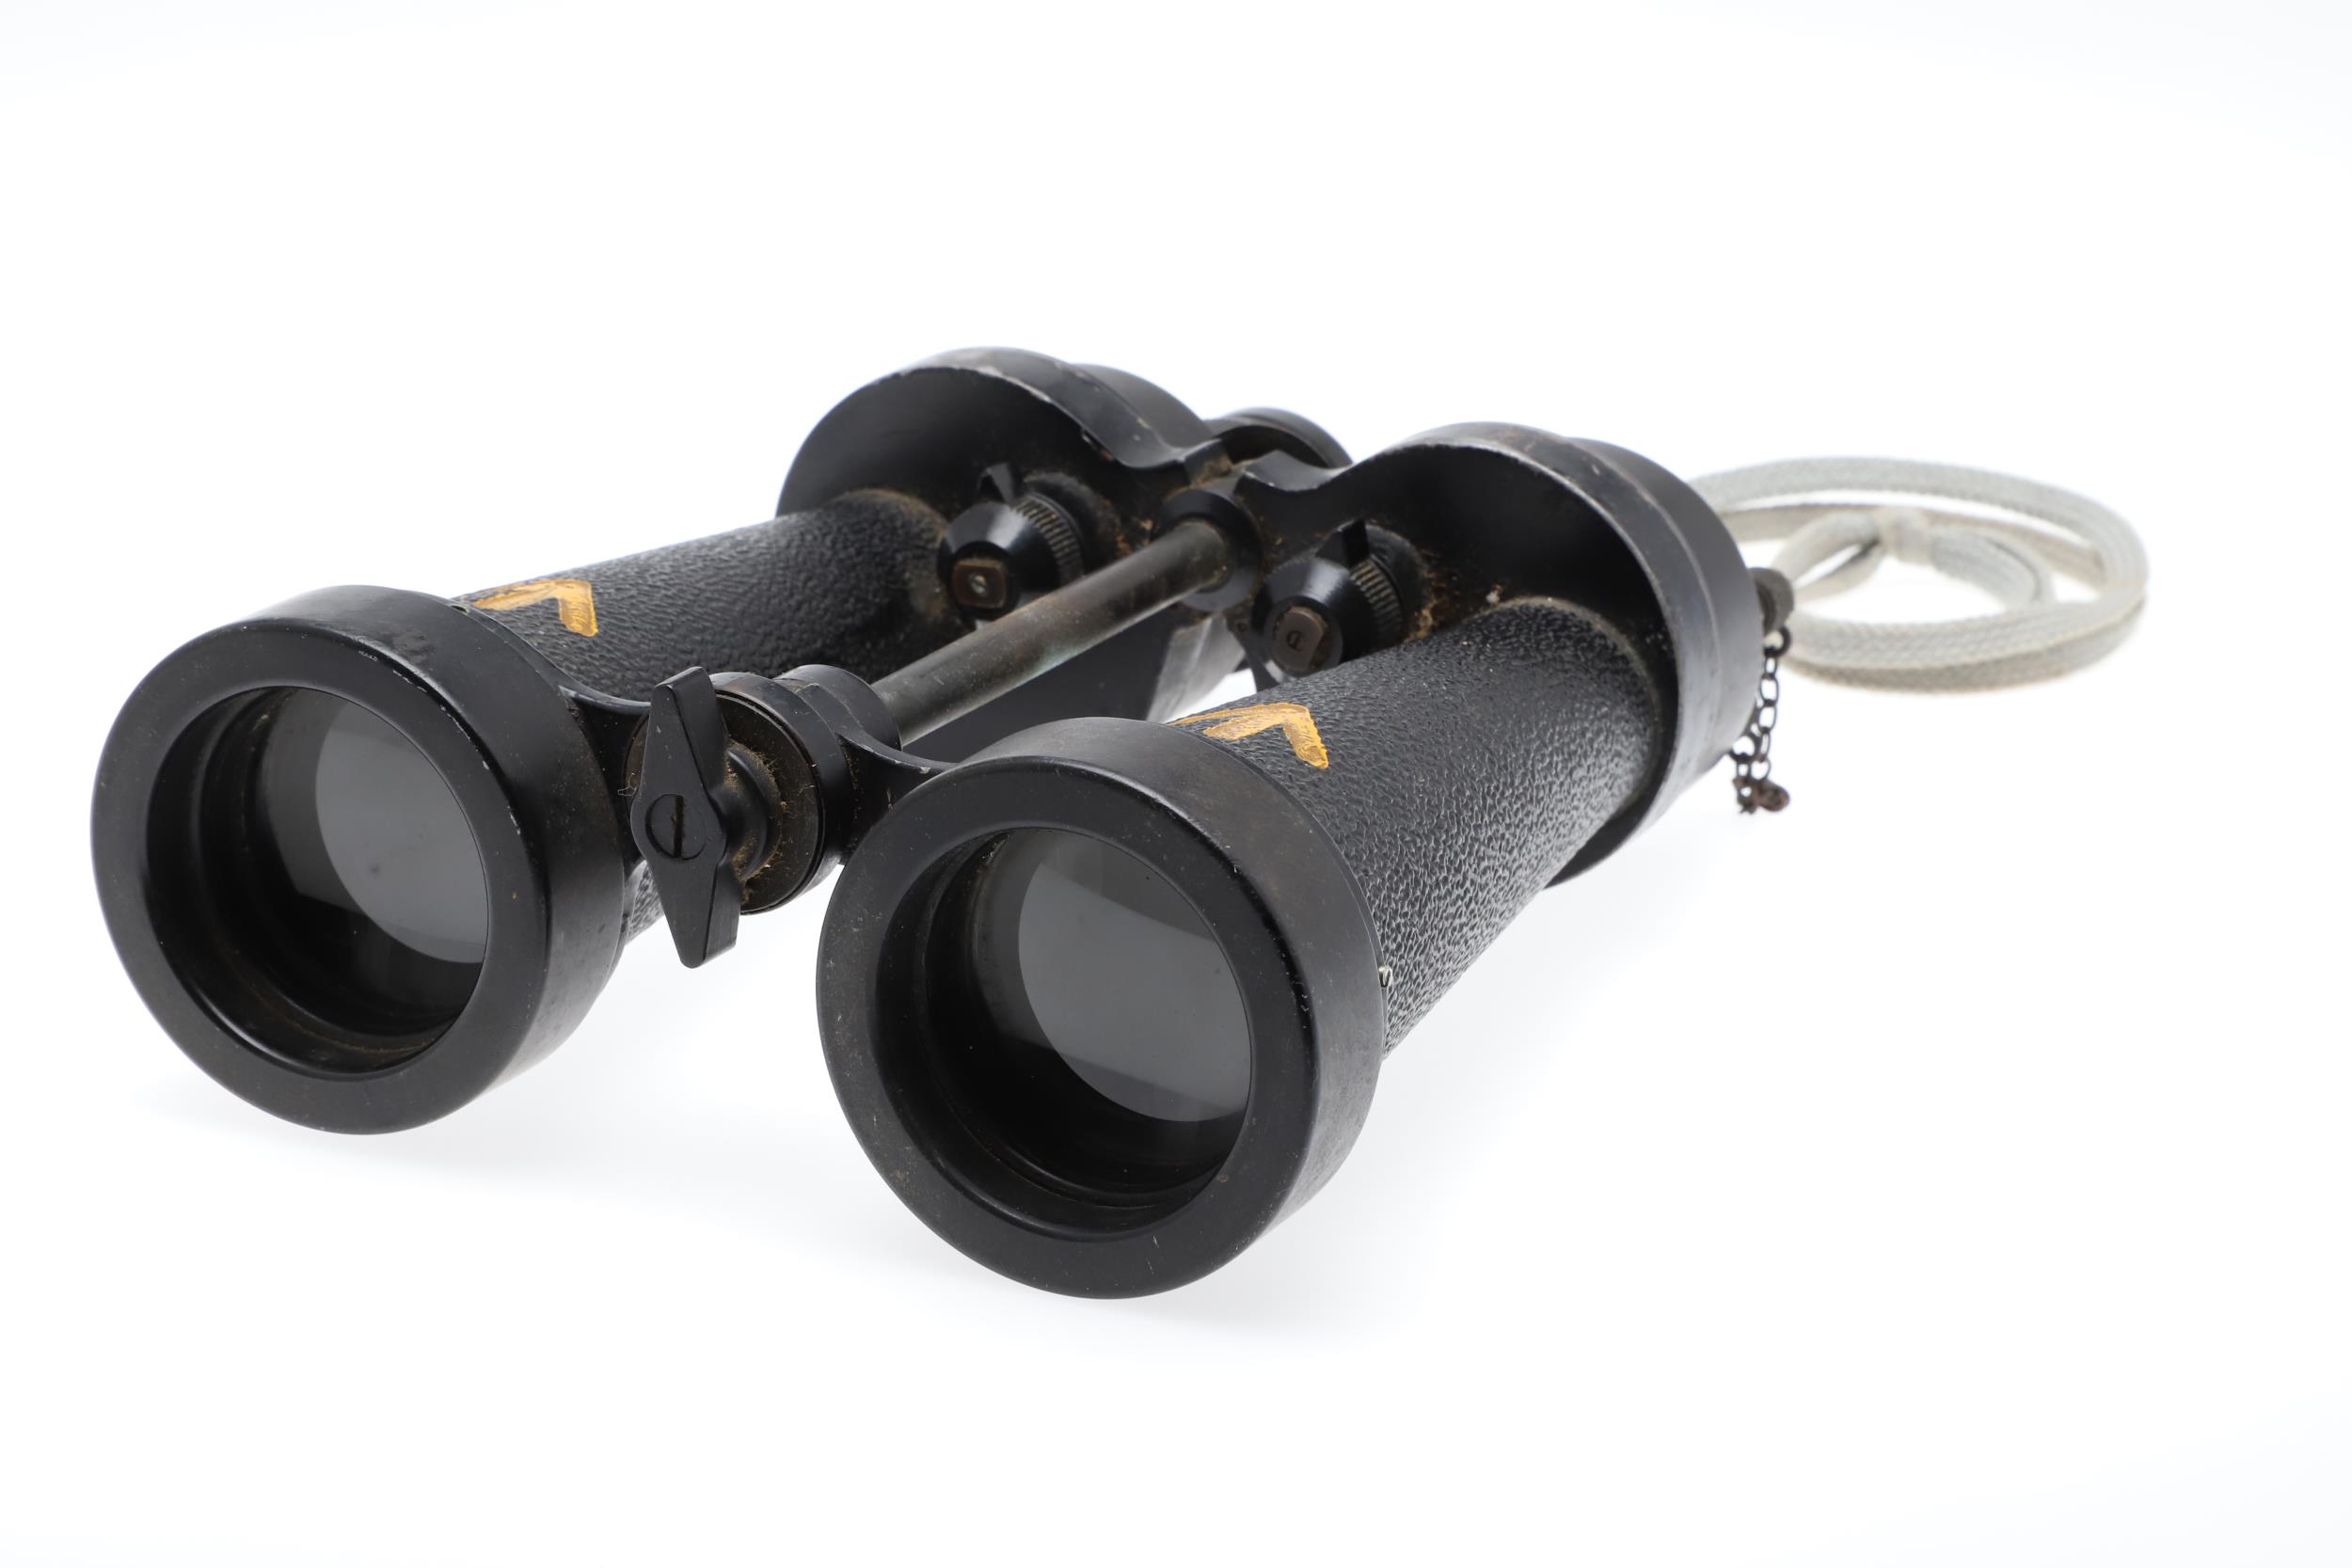 A PAIR OF SECOND WORLD WAR NAVAL BINOCULARS BY BARR AND STROUD. - Image 9 of 12